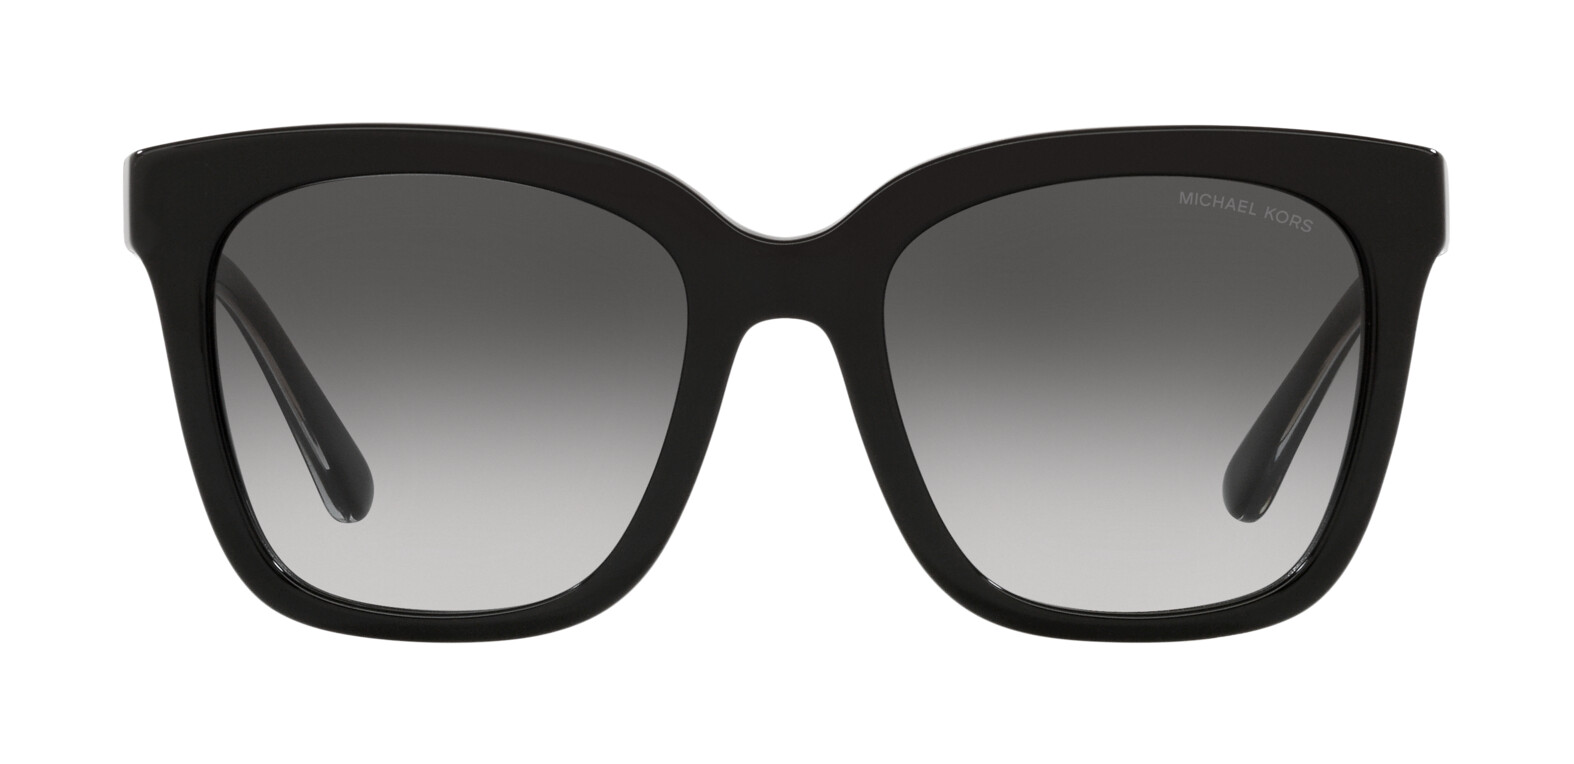 [products.image.front] Michael Kors SAN MARINO 0MK2163 30058G Sonnenbrille